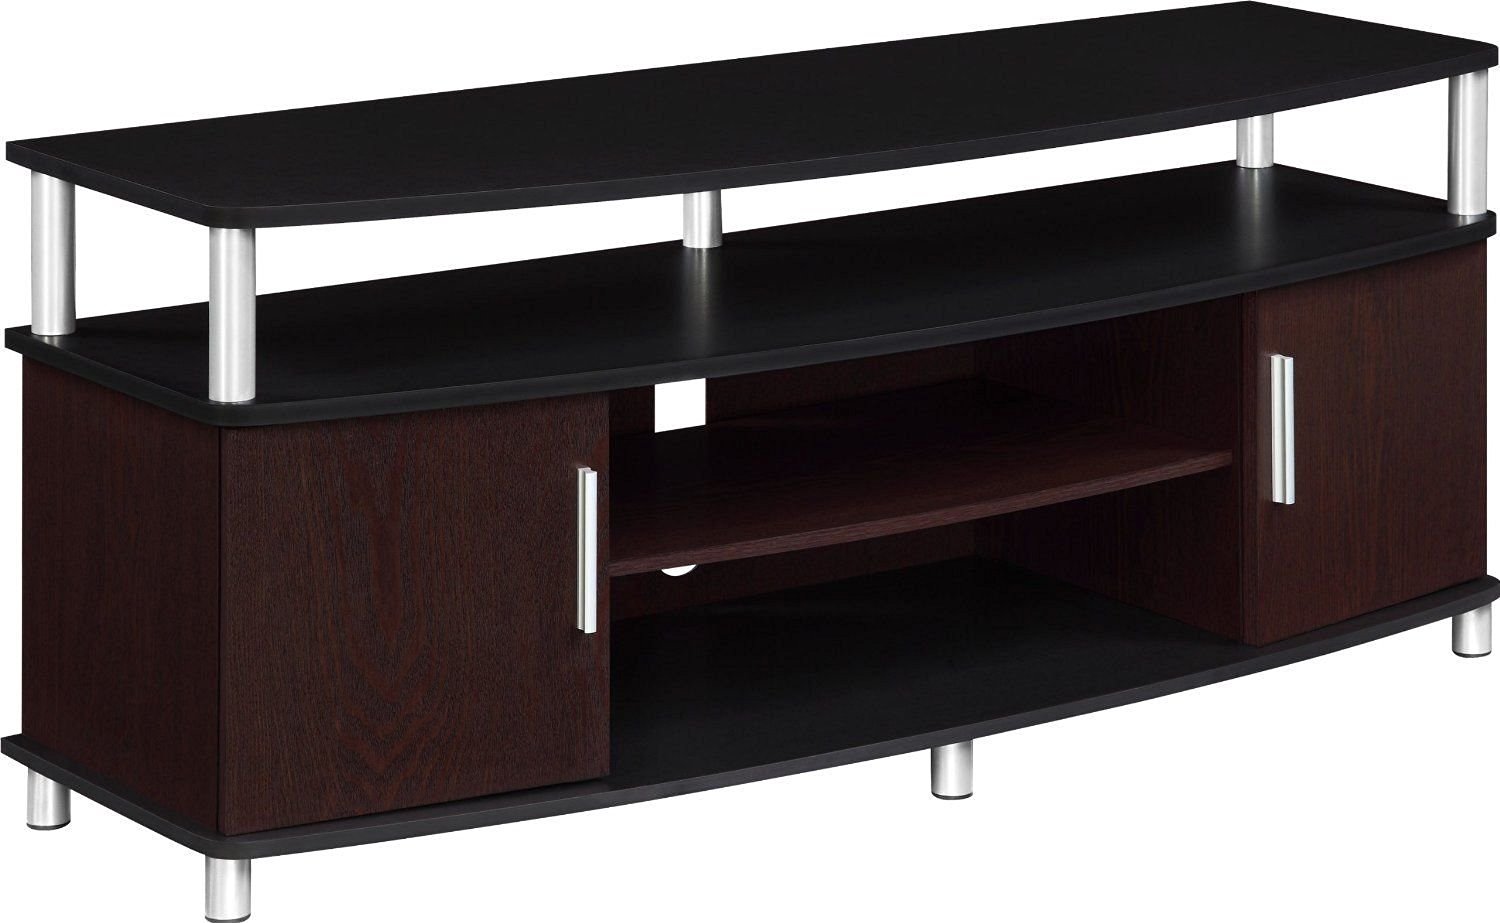 Carson TV Stand for TVs Up to 50" (Cherry/Black ...